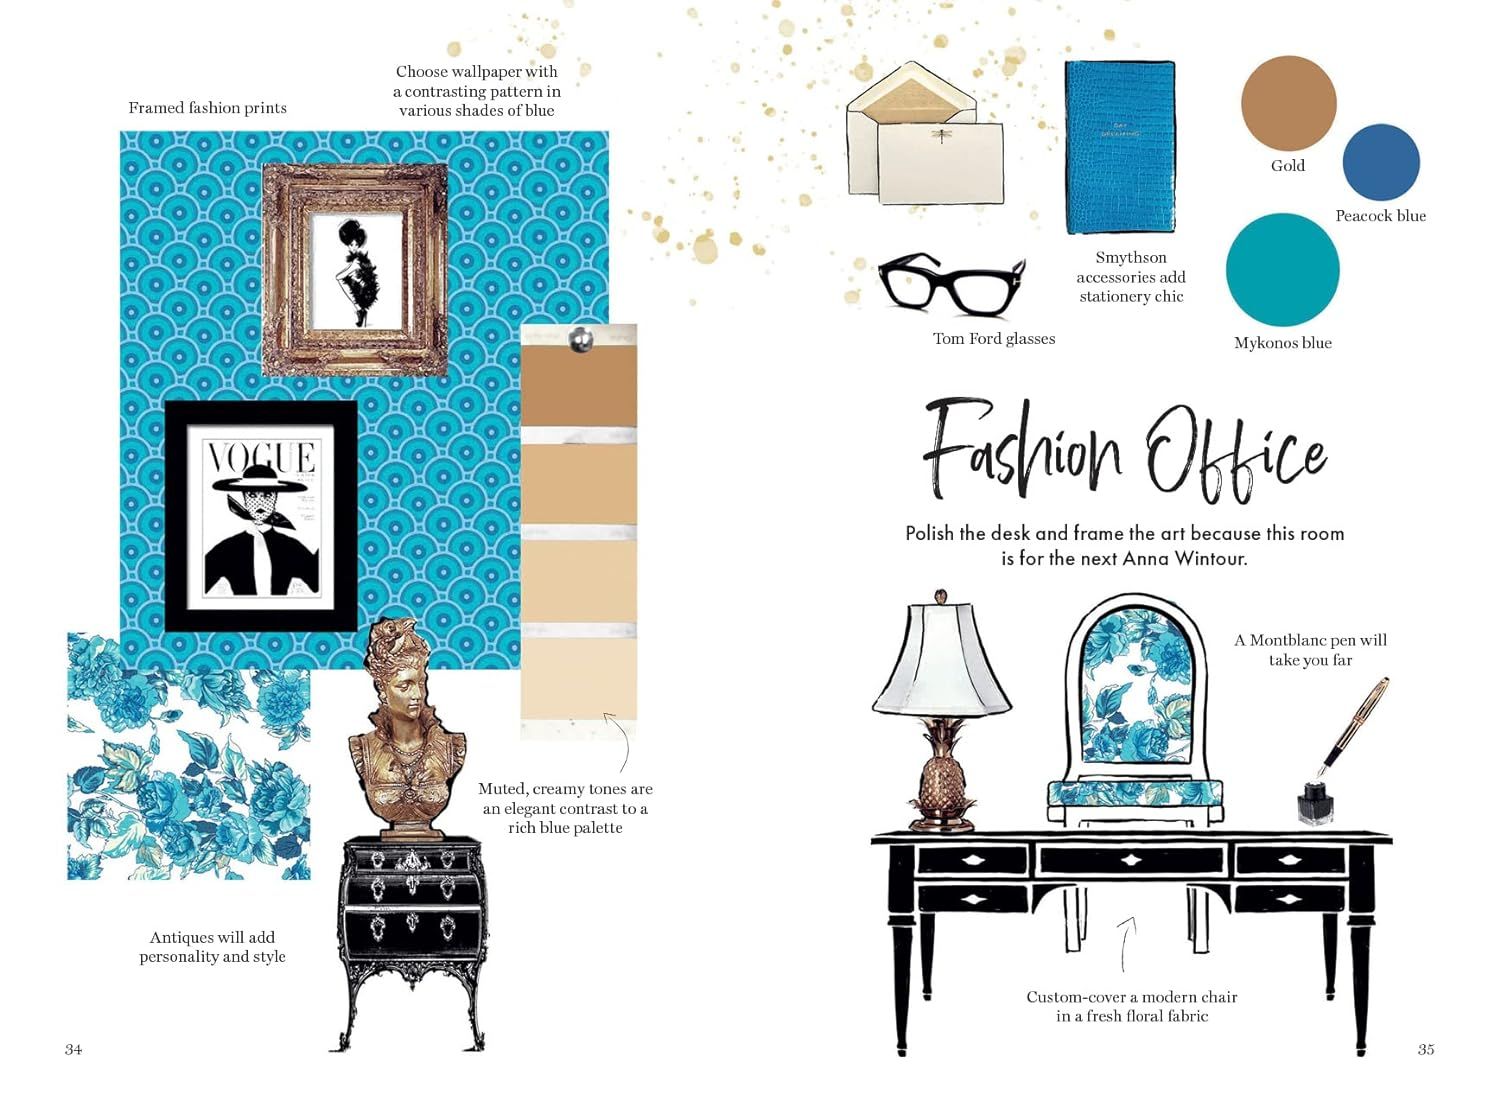  Fashion House Special Edition: Illustrated Interiors from the Icons of Style 